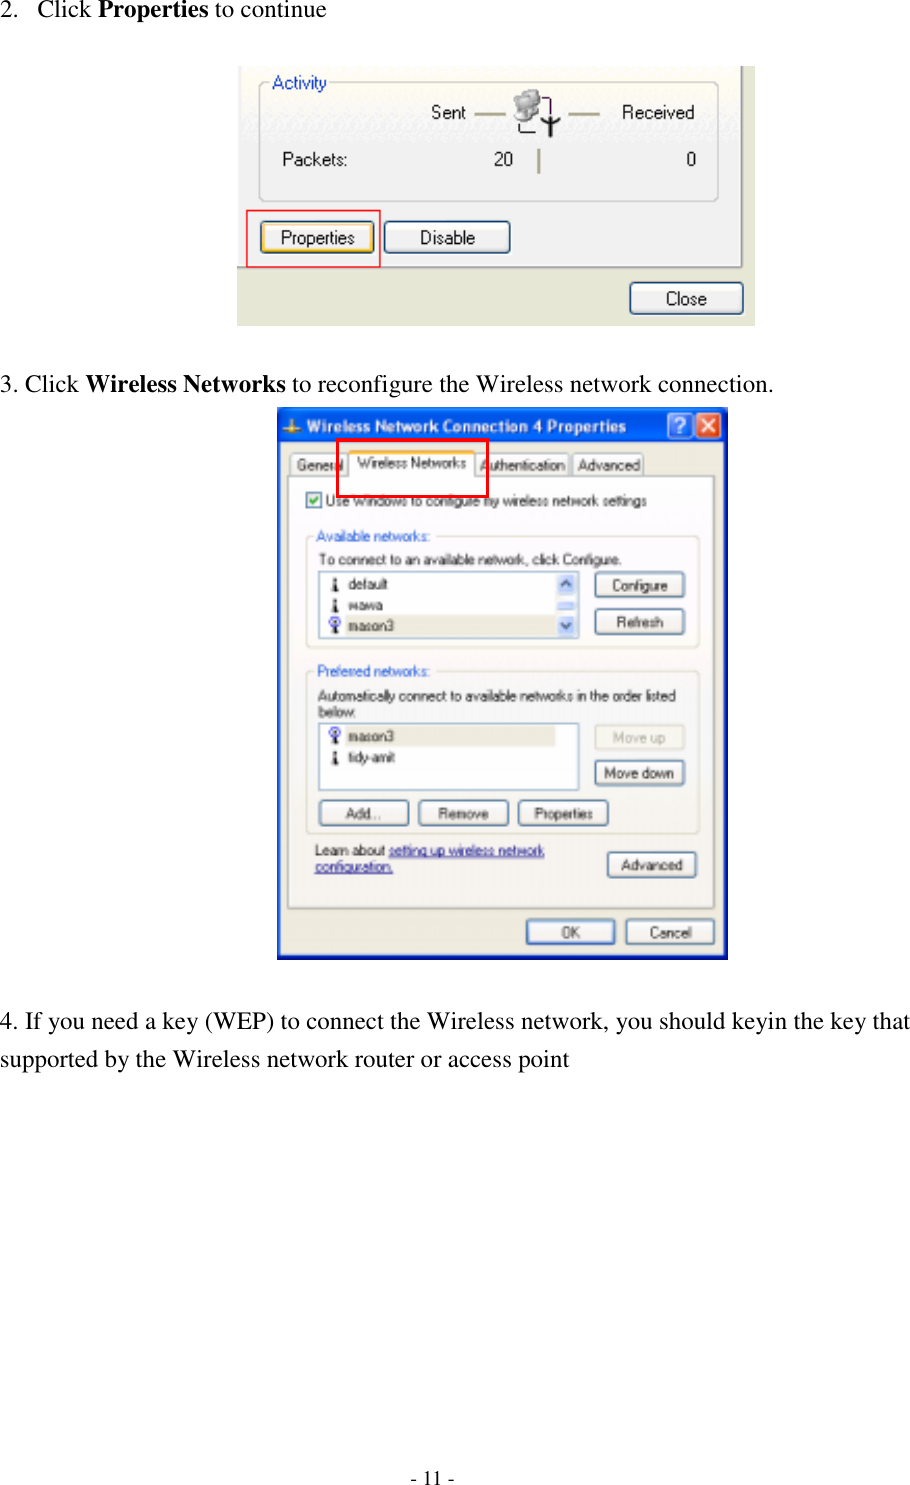    - 11 - 2. Click Properties to continue    3. Click Wireless Networks to reconfigure the Wireless network connection.   4. If you need a key (WEP) to connect the Wireless network, you should keyin the key that supported by the Wireless network router or access point 